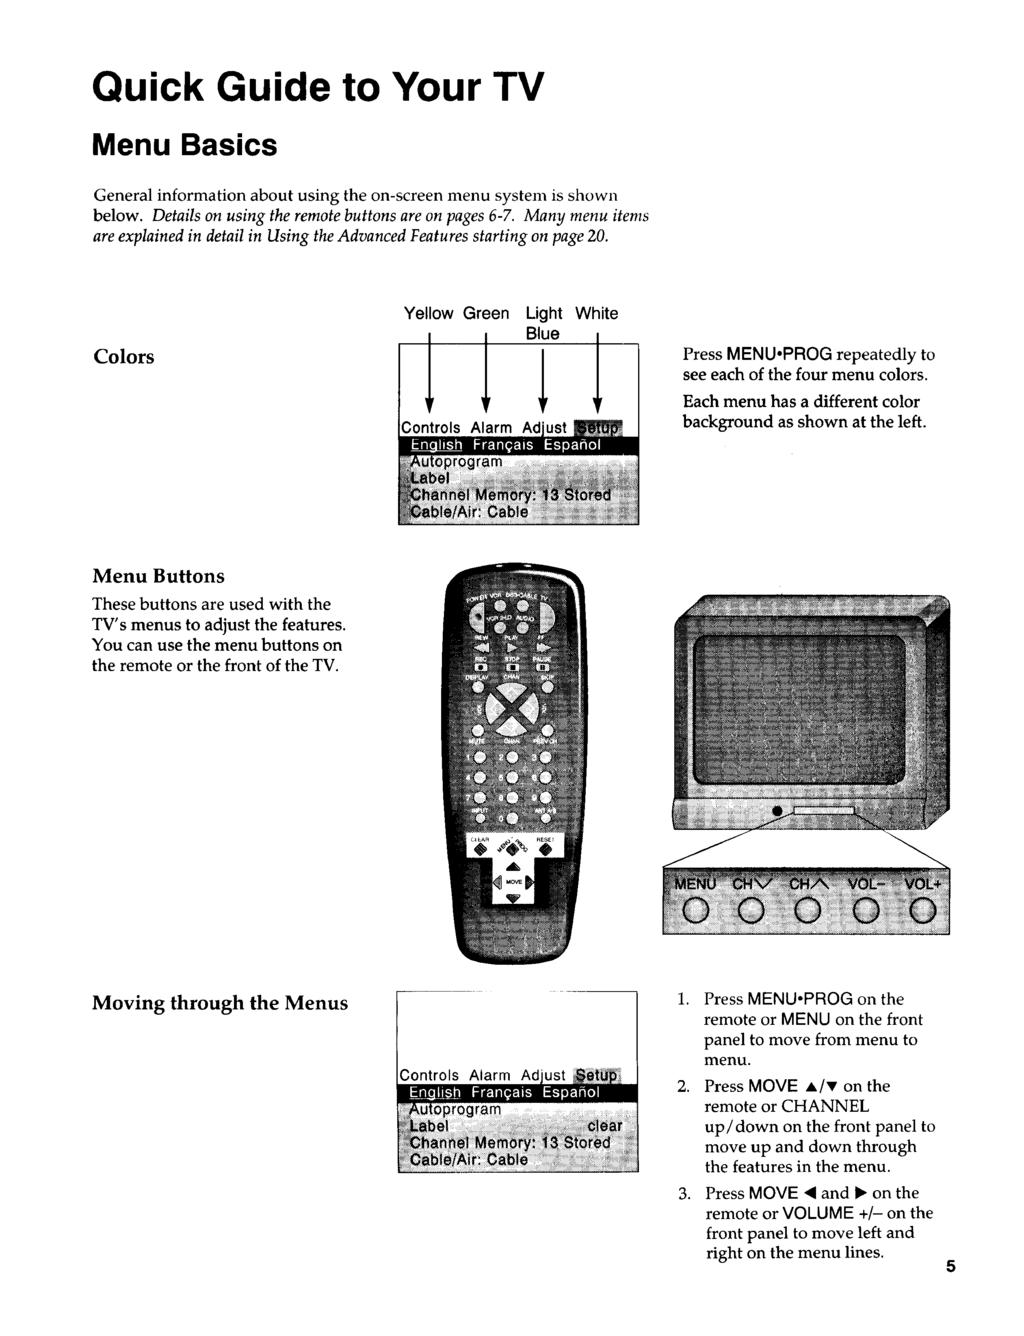 Quick Guide to Your TV Menu Basics General information about using the on-screen menu system is shown below. Details on using the remote buttons are on pages 6-7.